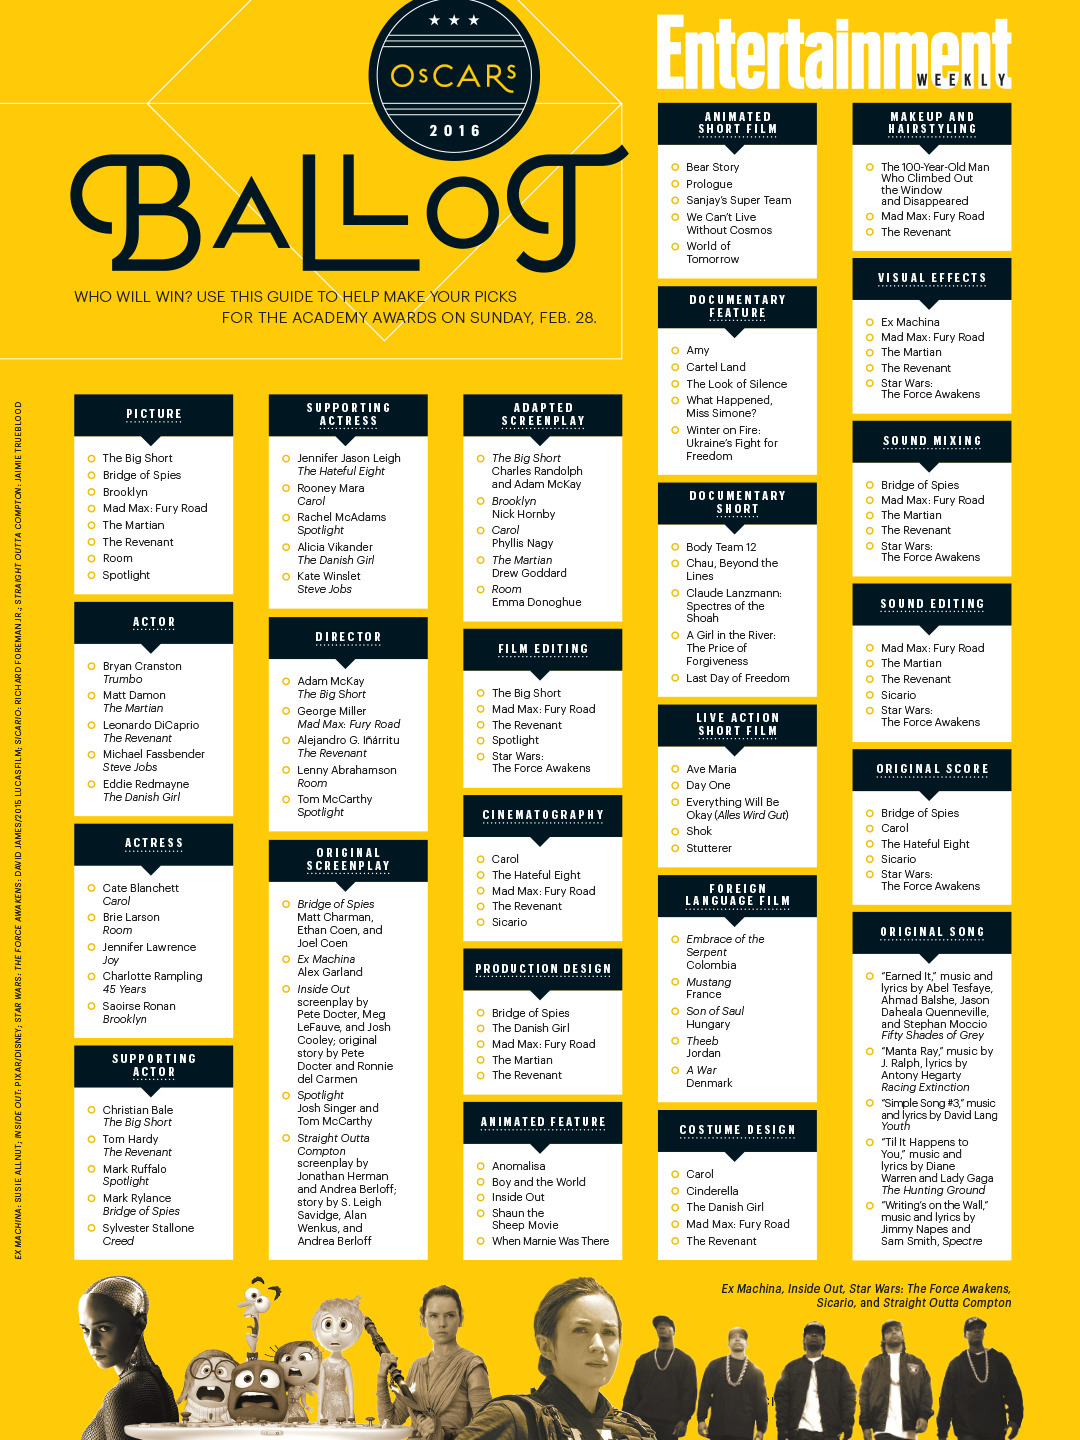 Entertainment Weekly — Make your Academy Awards picks with our Oscars...